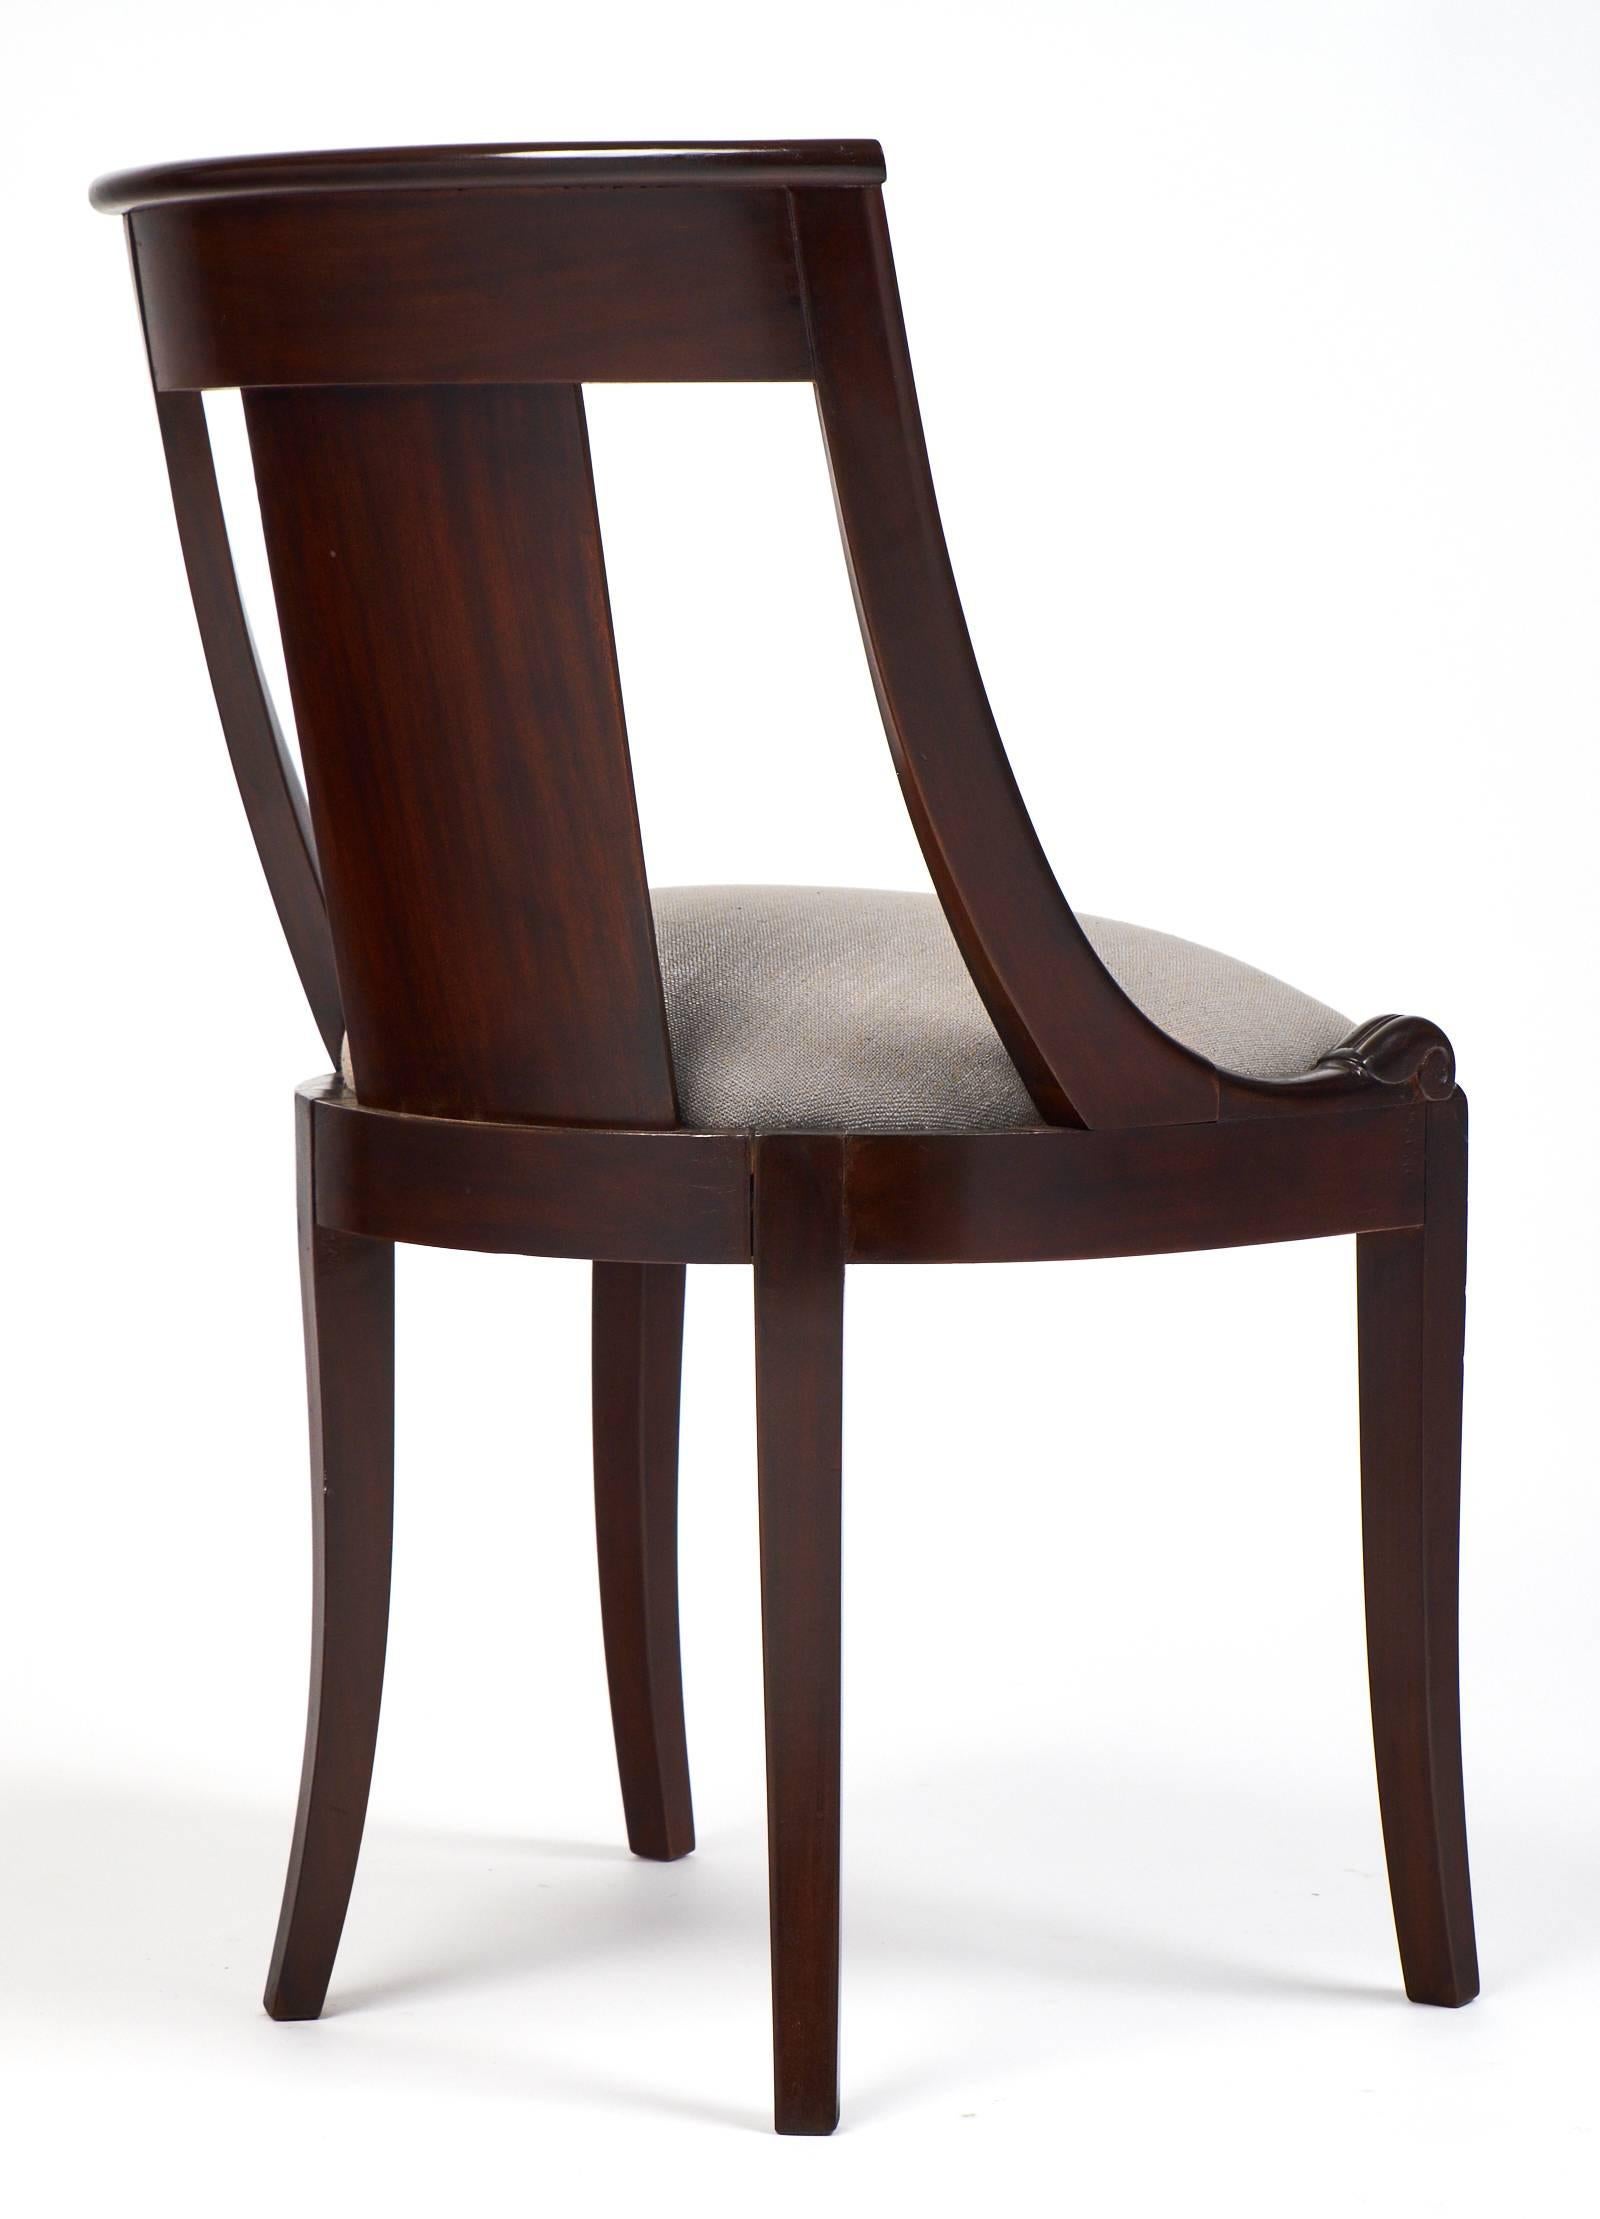 empire style dining chairs